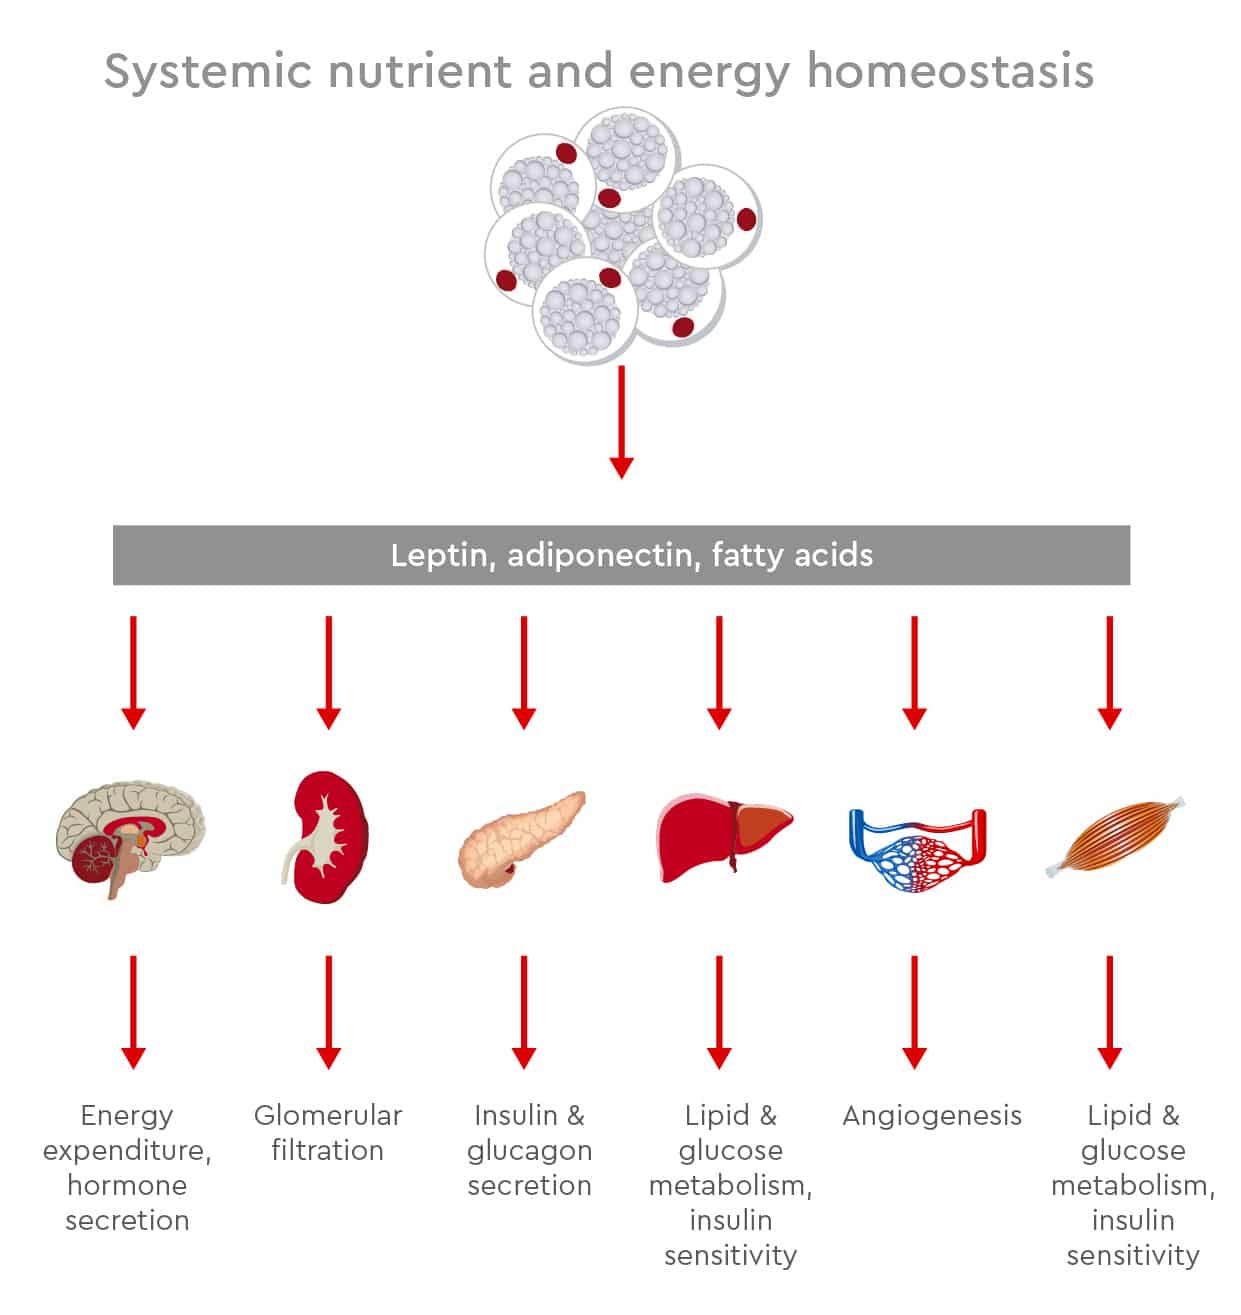 systemic nutrient and energy homeostasis